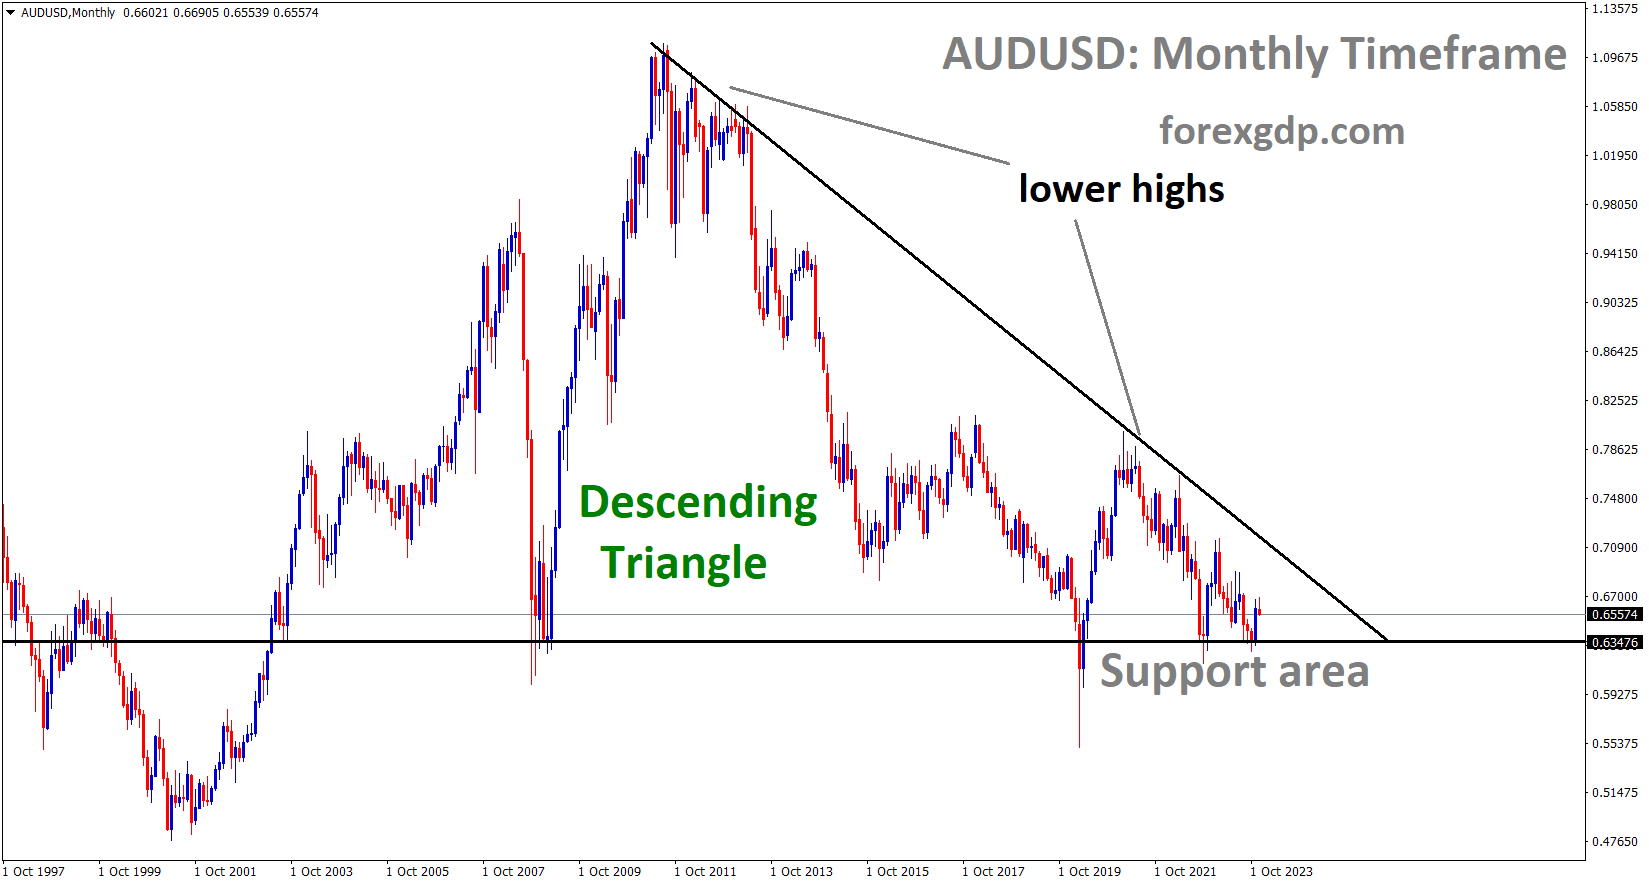 AUDUSD is moving in a descending triangle pattern and the market the reached the support area of the pattern